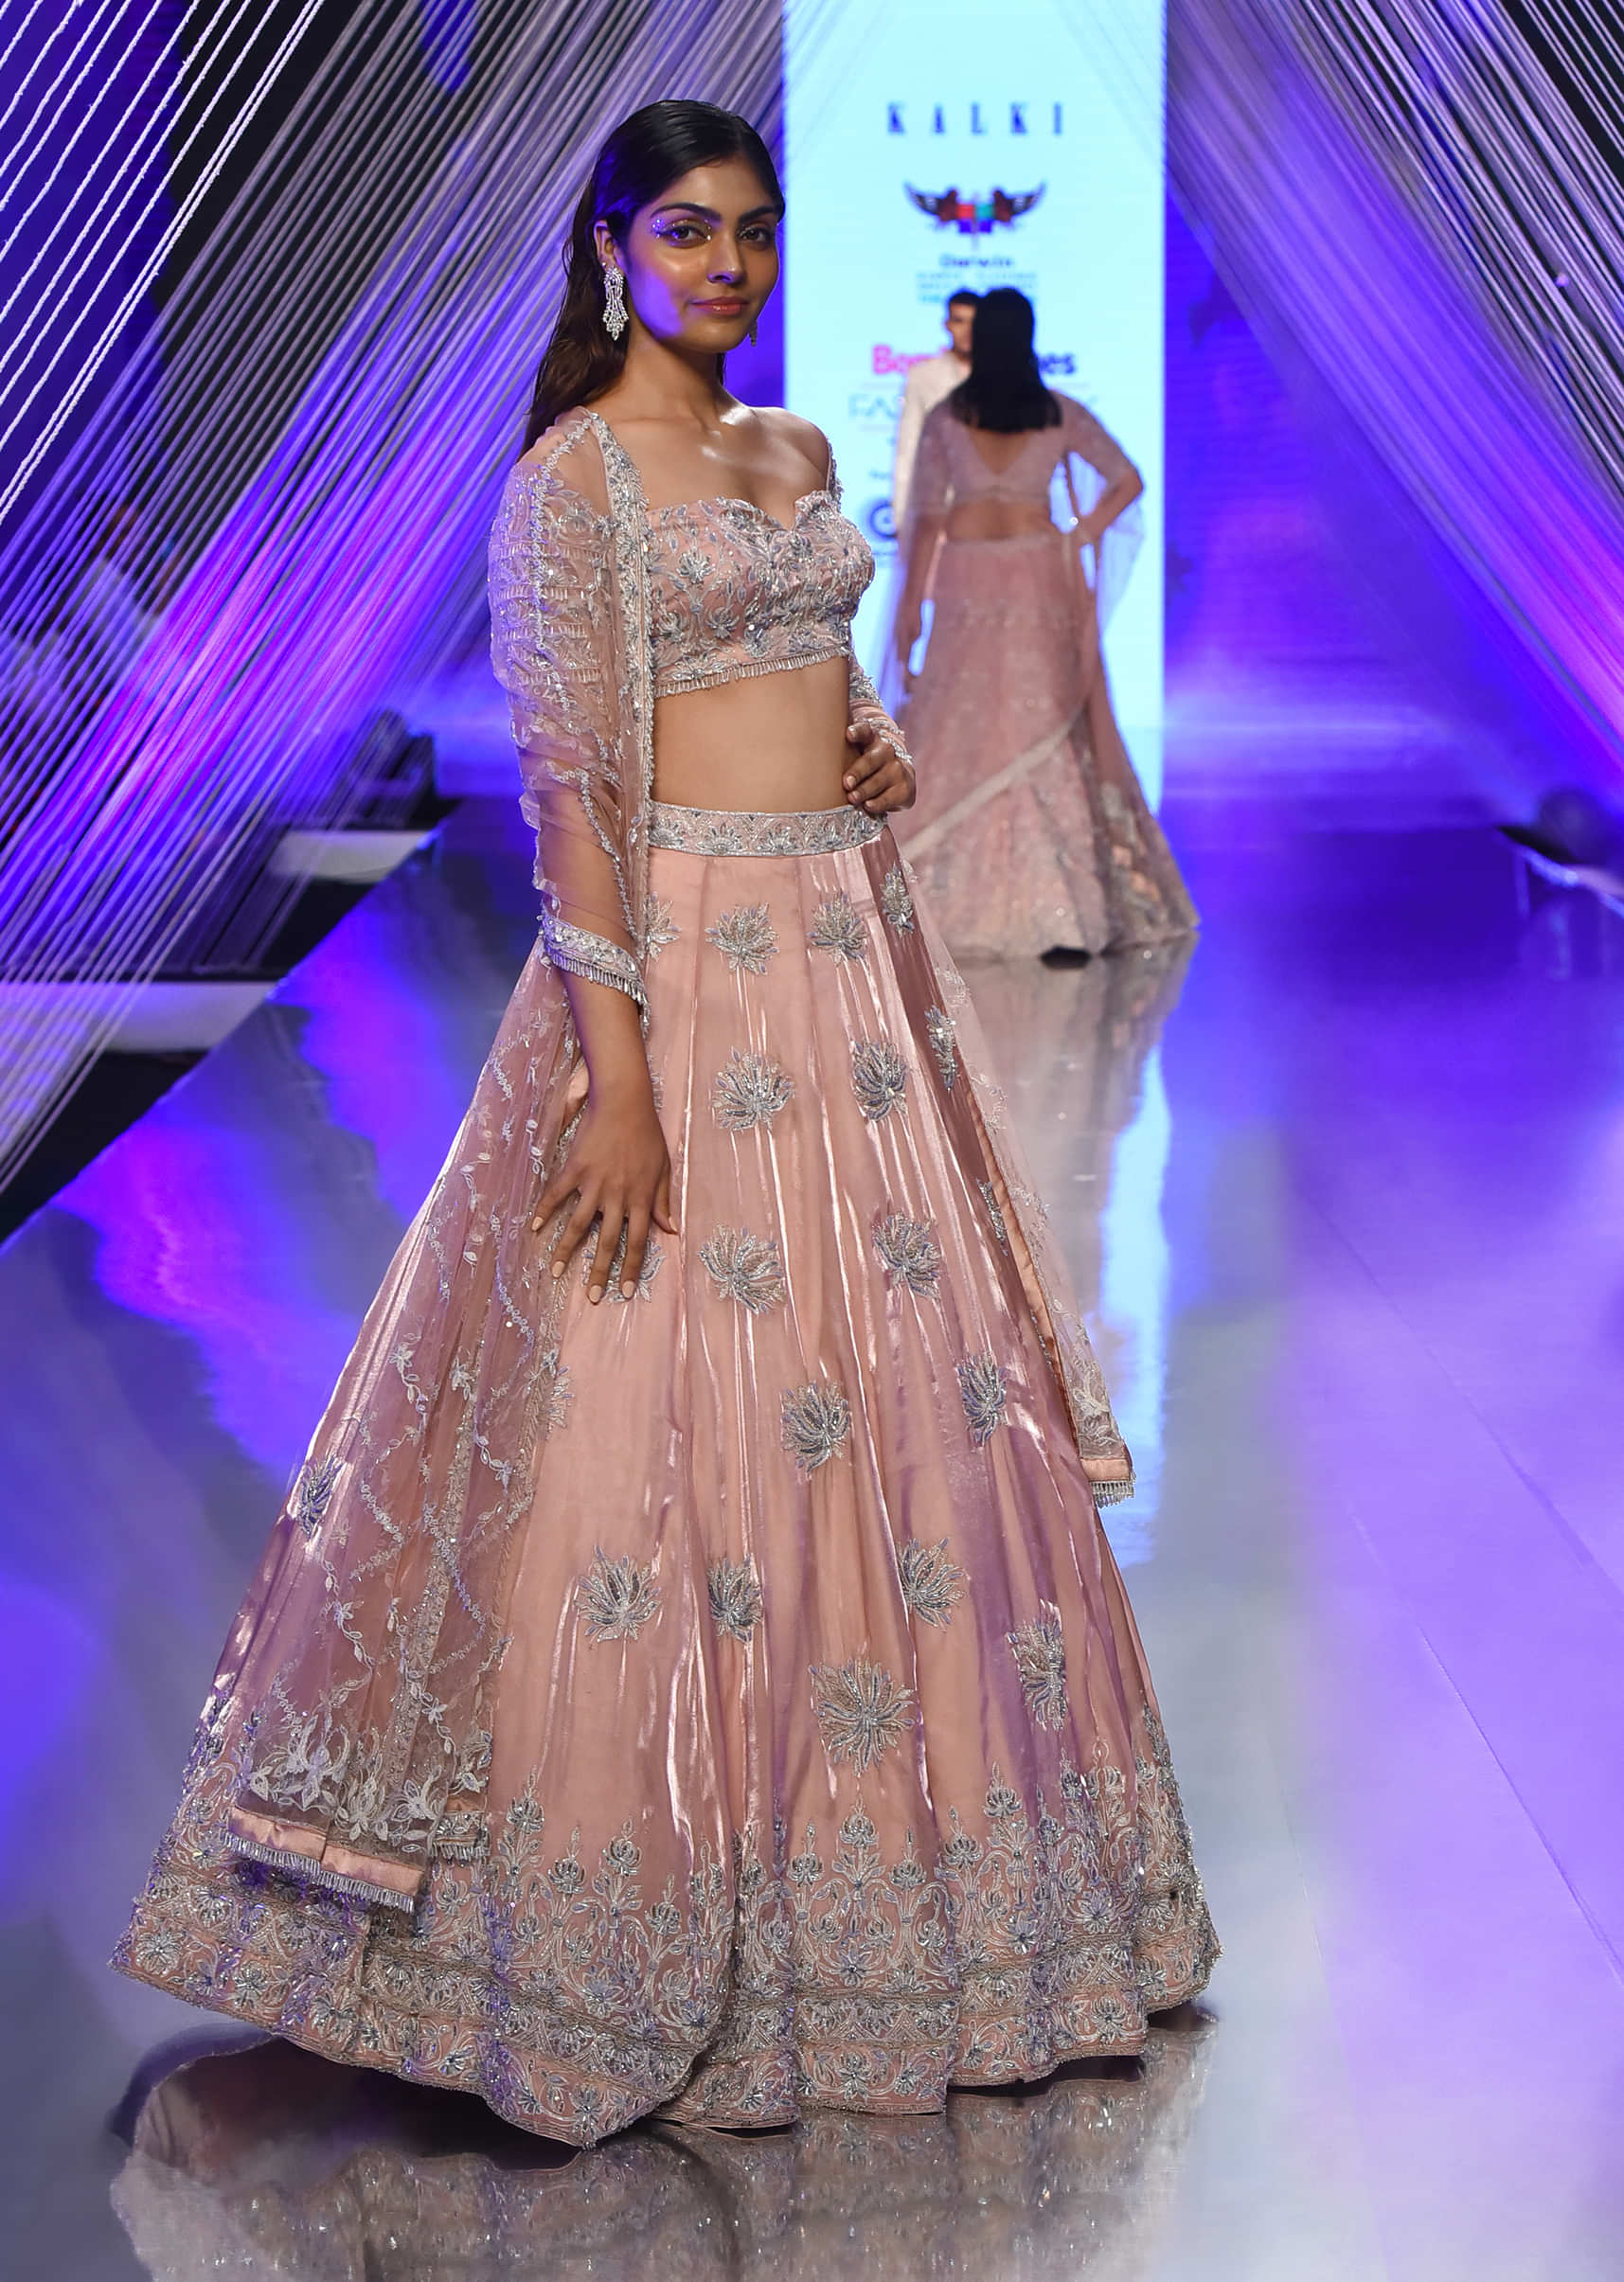 Flarry Sleeves one off shoulder with Lehenga - Babeehive